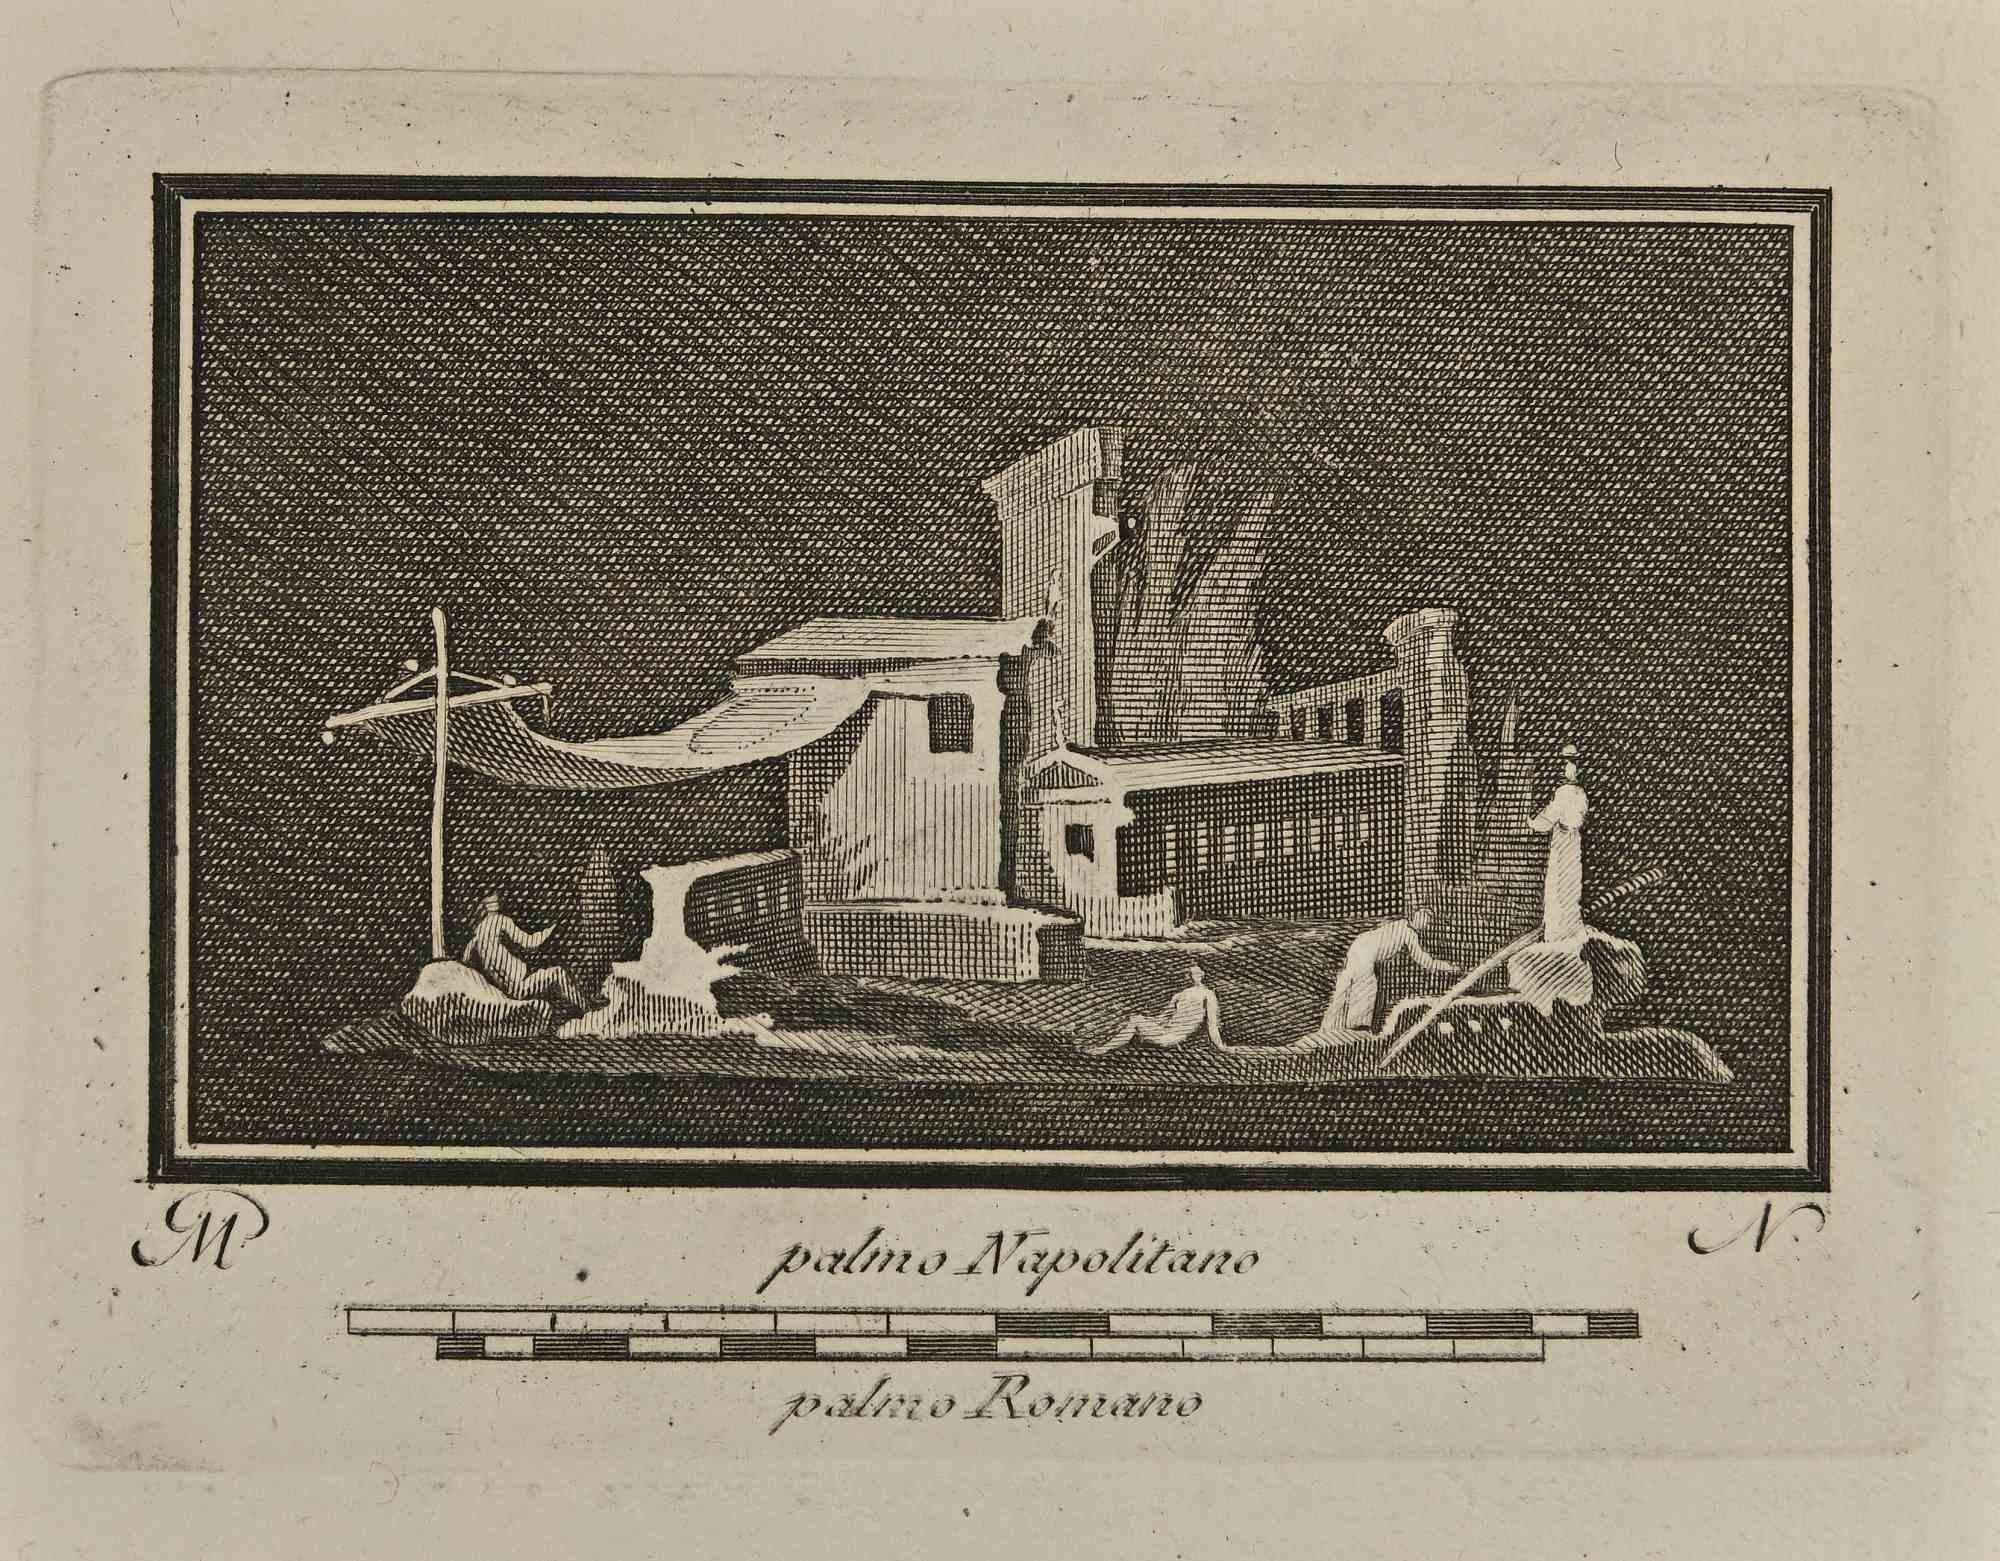 Ancient Roman Fresco from Herculaneum from the series "Antiquities of Herculaneum", is an etching on paper realized by Carlo Nolli in the 18th Century.

Signed on the plate.

Good conditions.

 

The etching belongs to the print suite “Antiquities